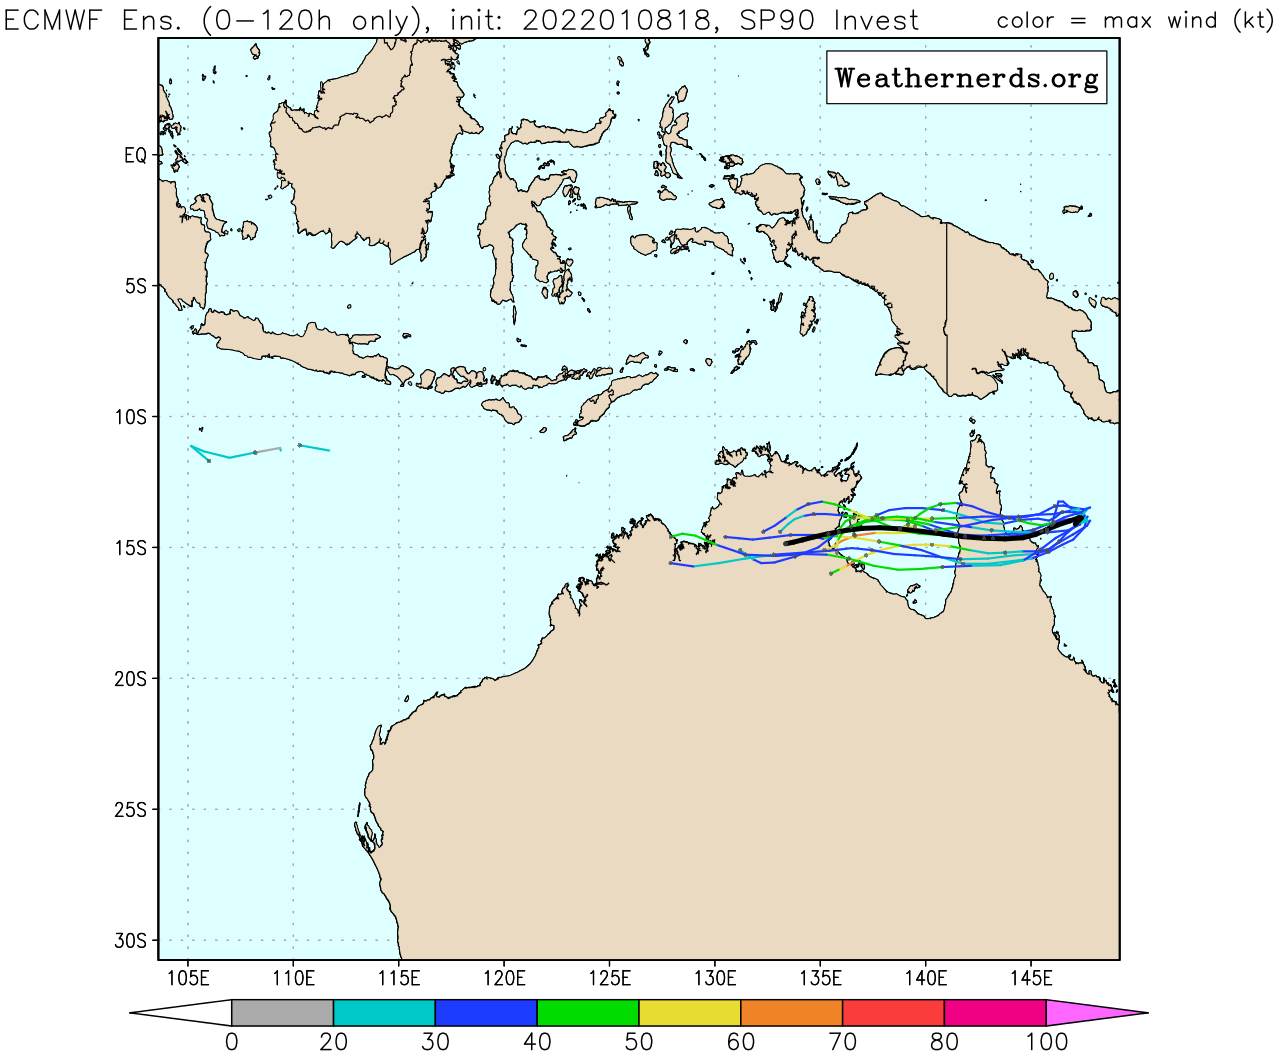 BOTH ECMWF (08/12Z) AND GFS (08/18Z) ARE NOW  INDICATING A TROPICAL STORM STRENGTH SYSTEM MAKING LANDFALL NEAR TAU  36 ALONG THE EASTERN COAST OF THE CAPE YORK PENINSULA.